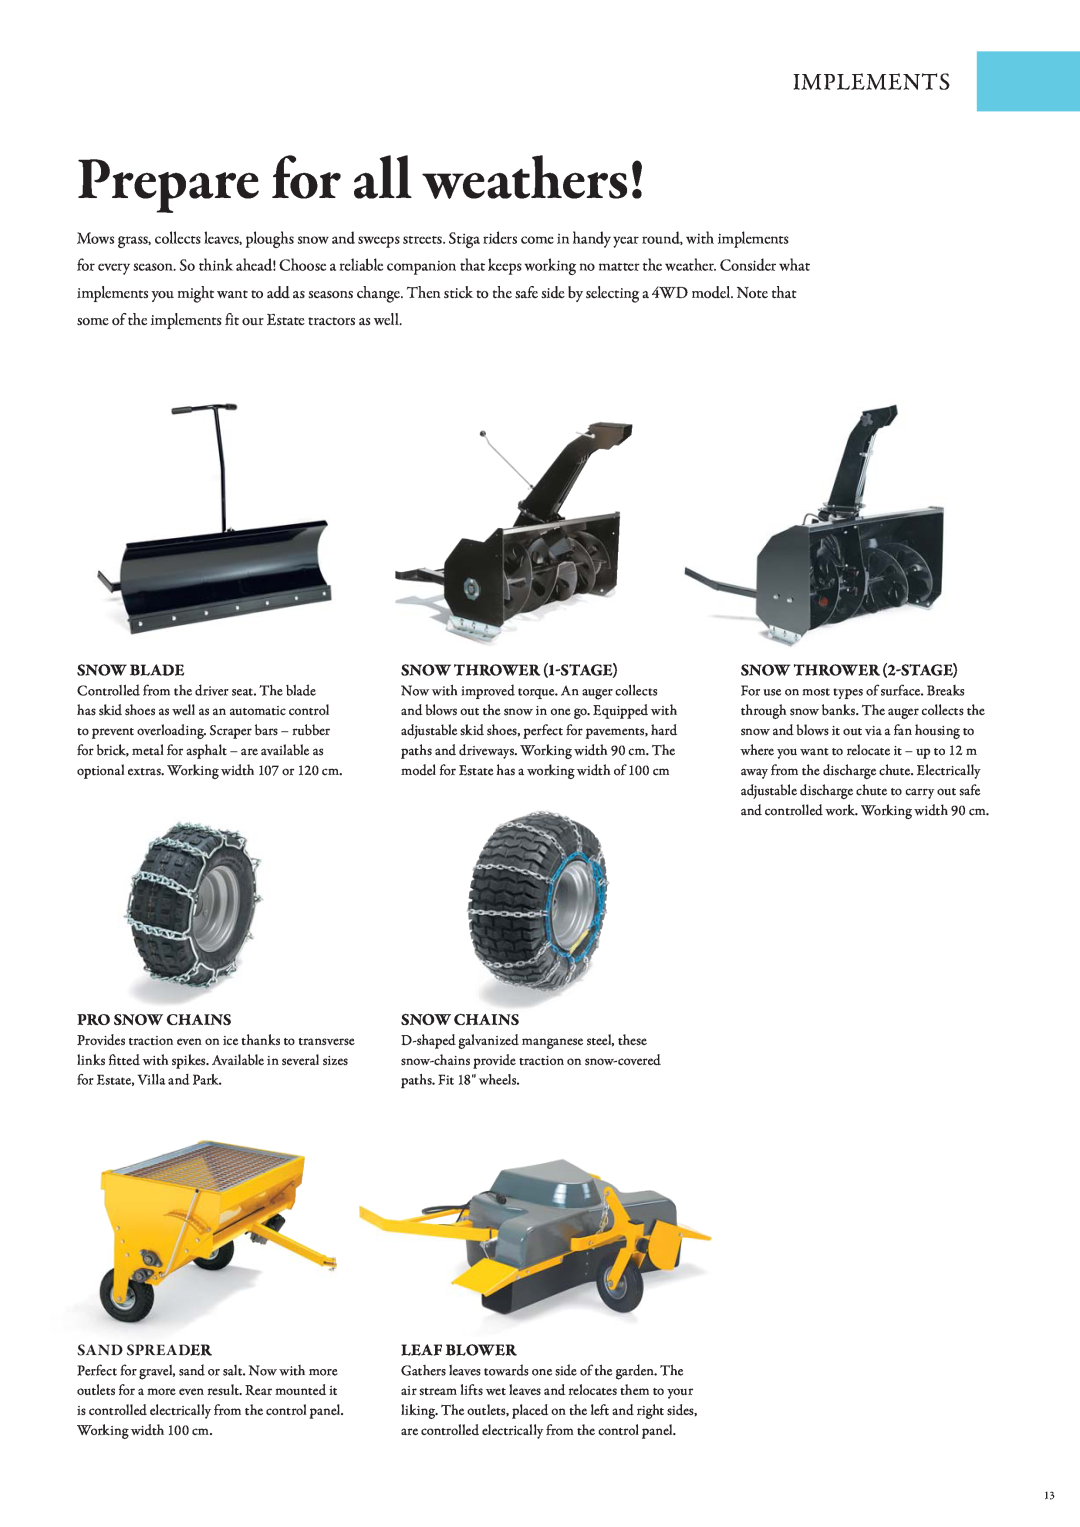 Stiga Snow Throwers Prepare for all weathers, Snow Blade, SNOW THROWER 1-STAGE, SNOW THROWER 2-STAGE, Pro Snow Chains 